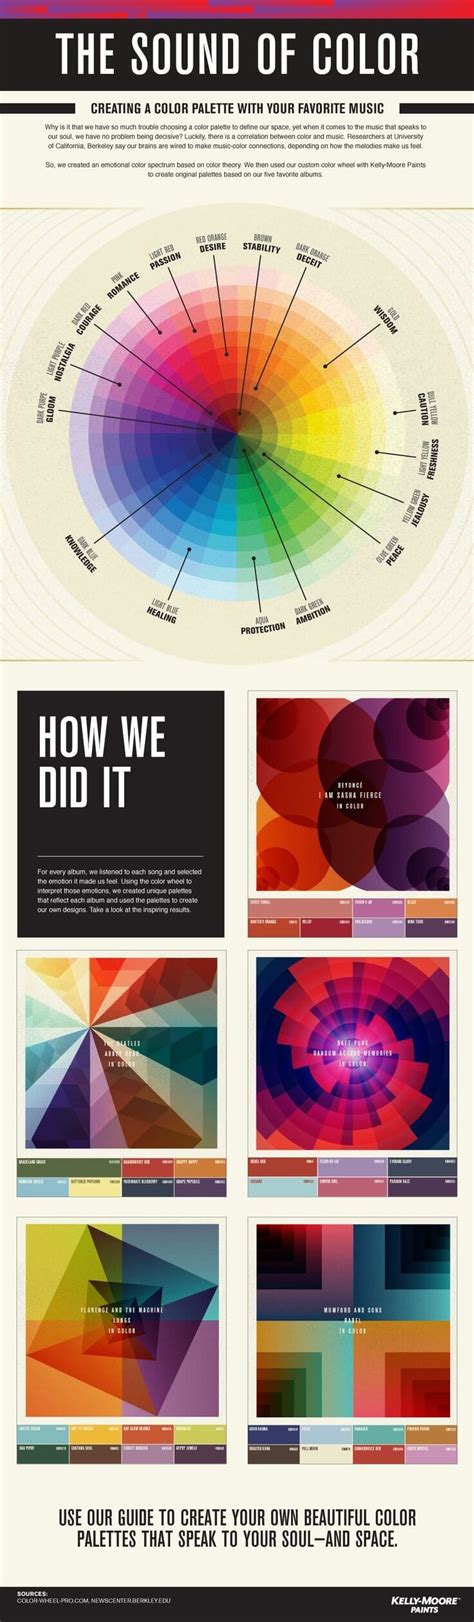 9 Awesome Infographic Examples Plus Tips To Create Your Own